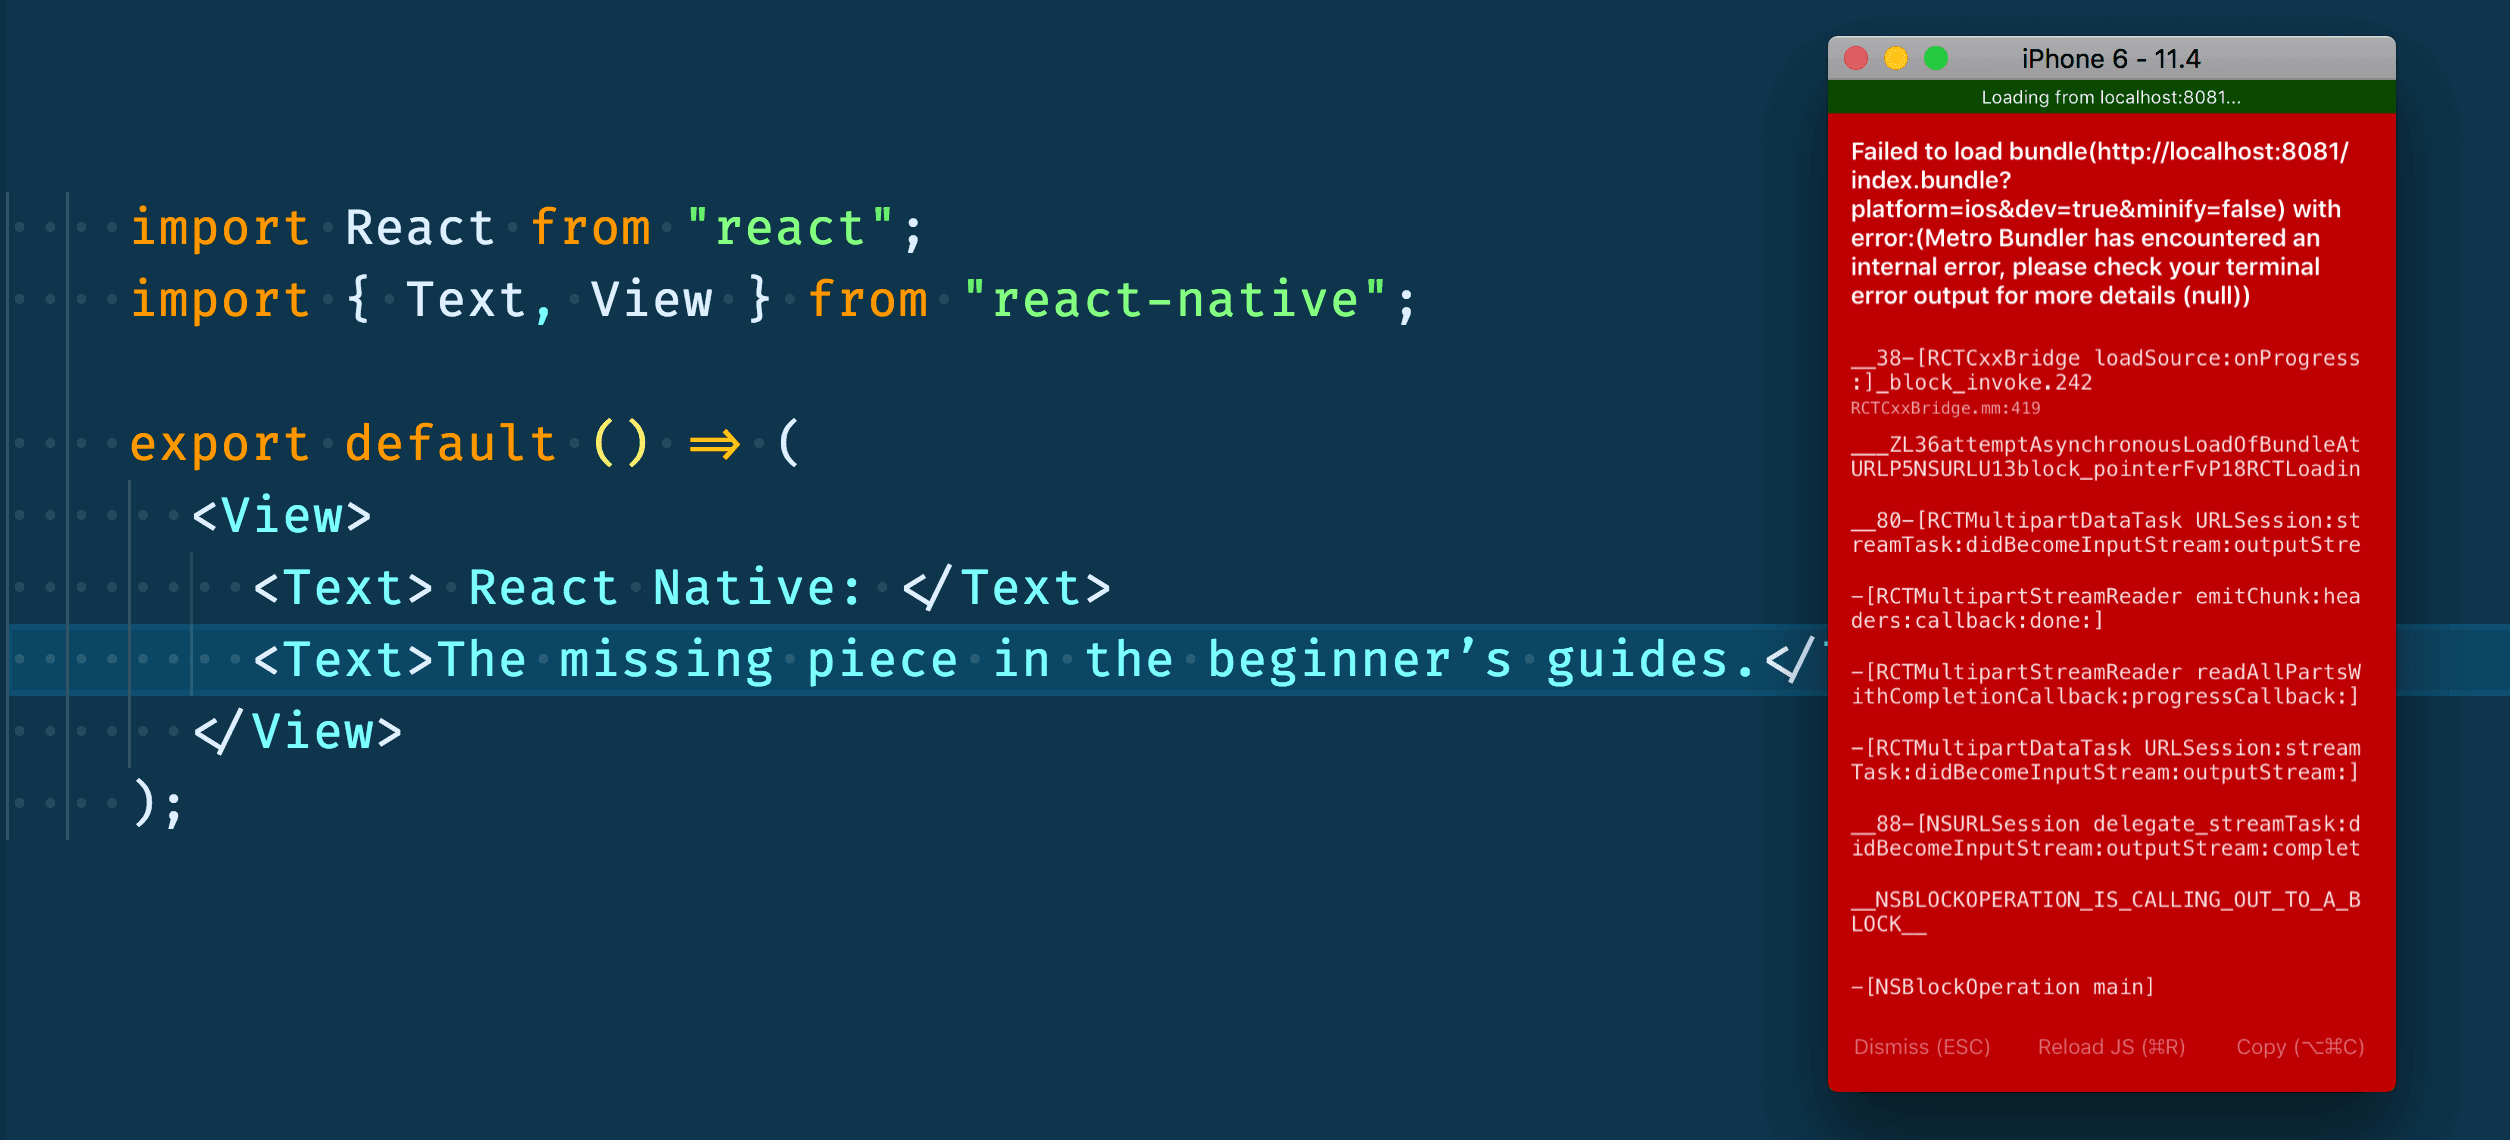 React Native, The missing piece in the beginner’s guides.